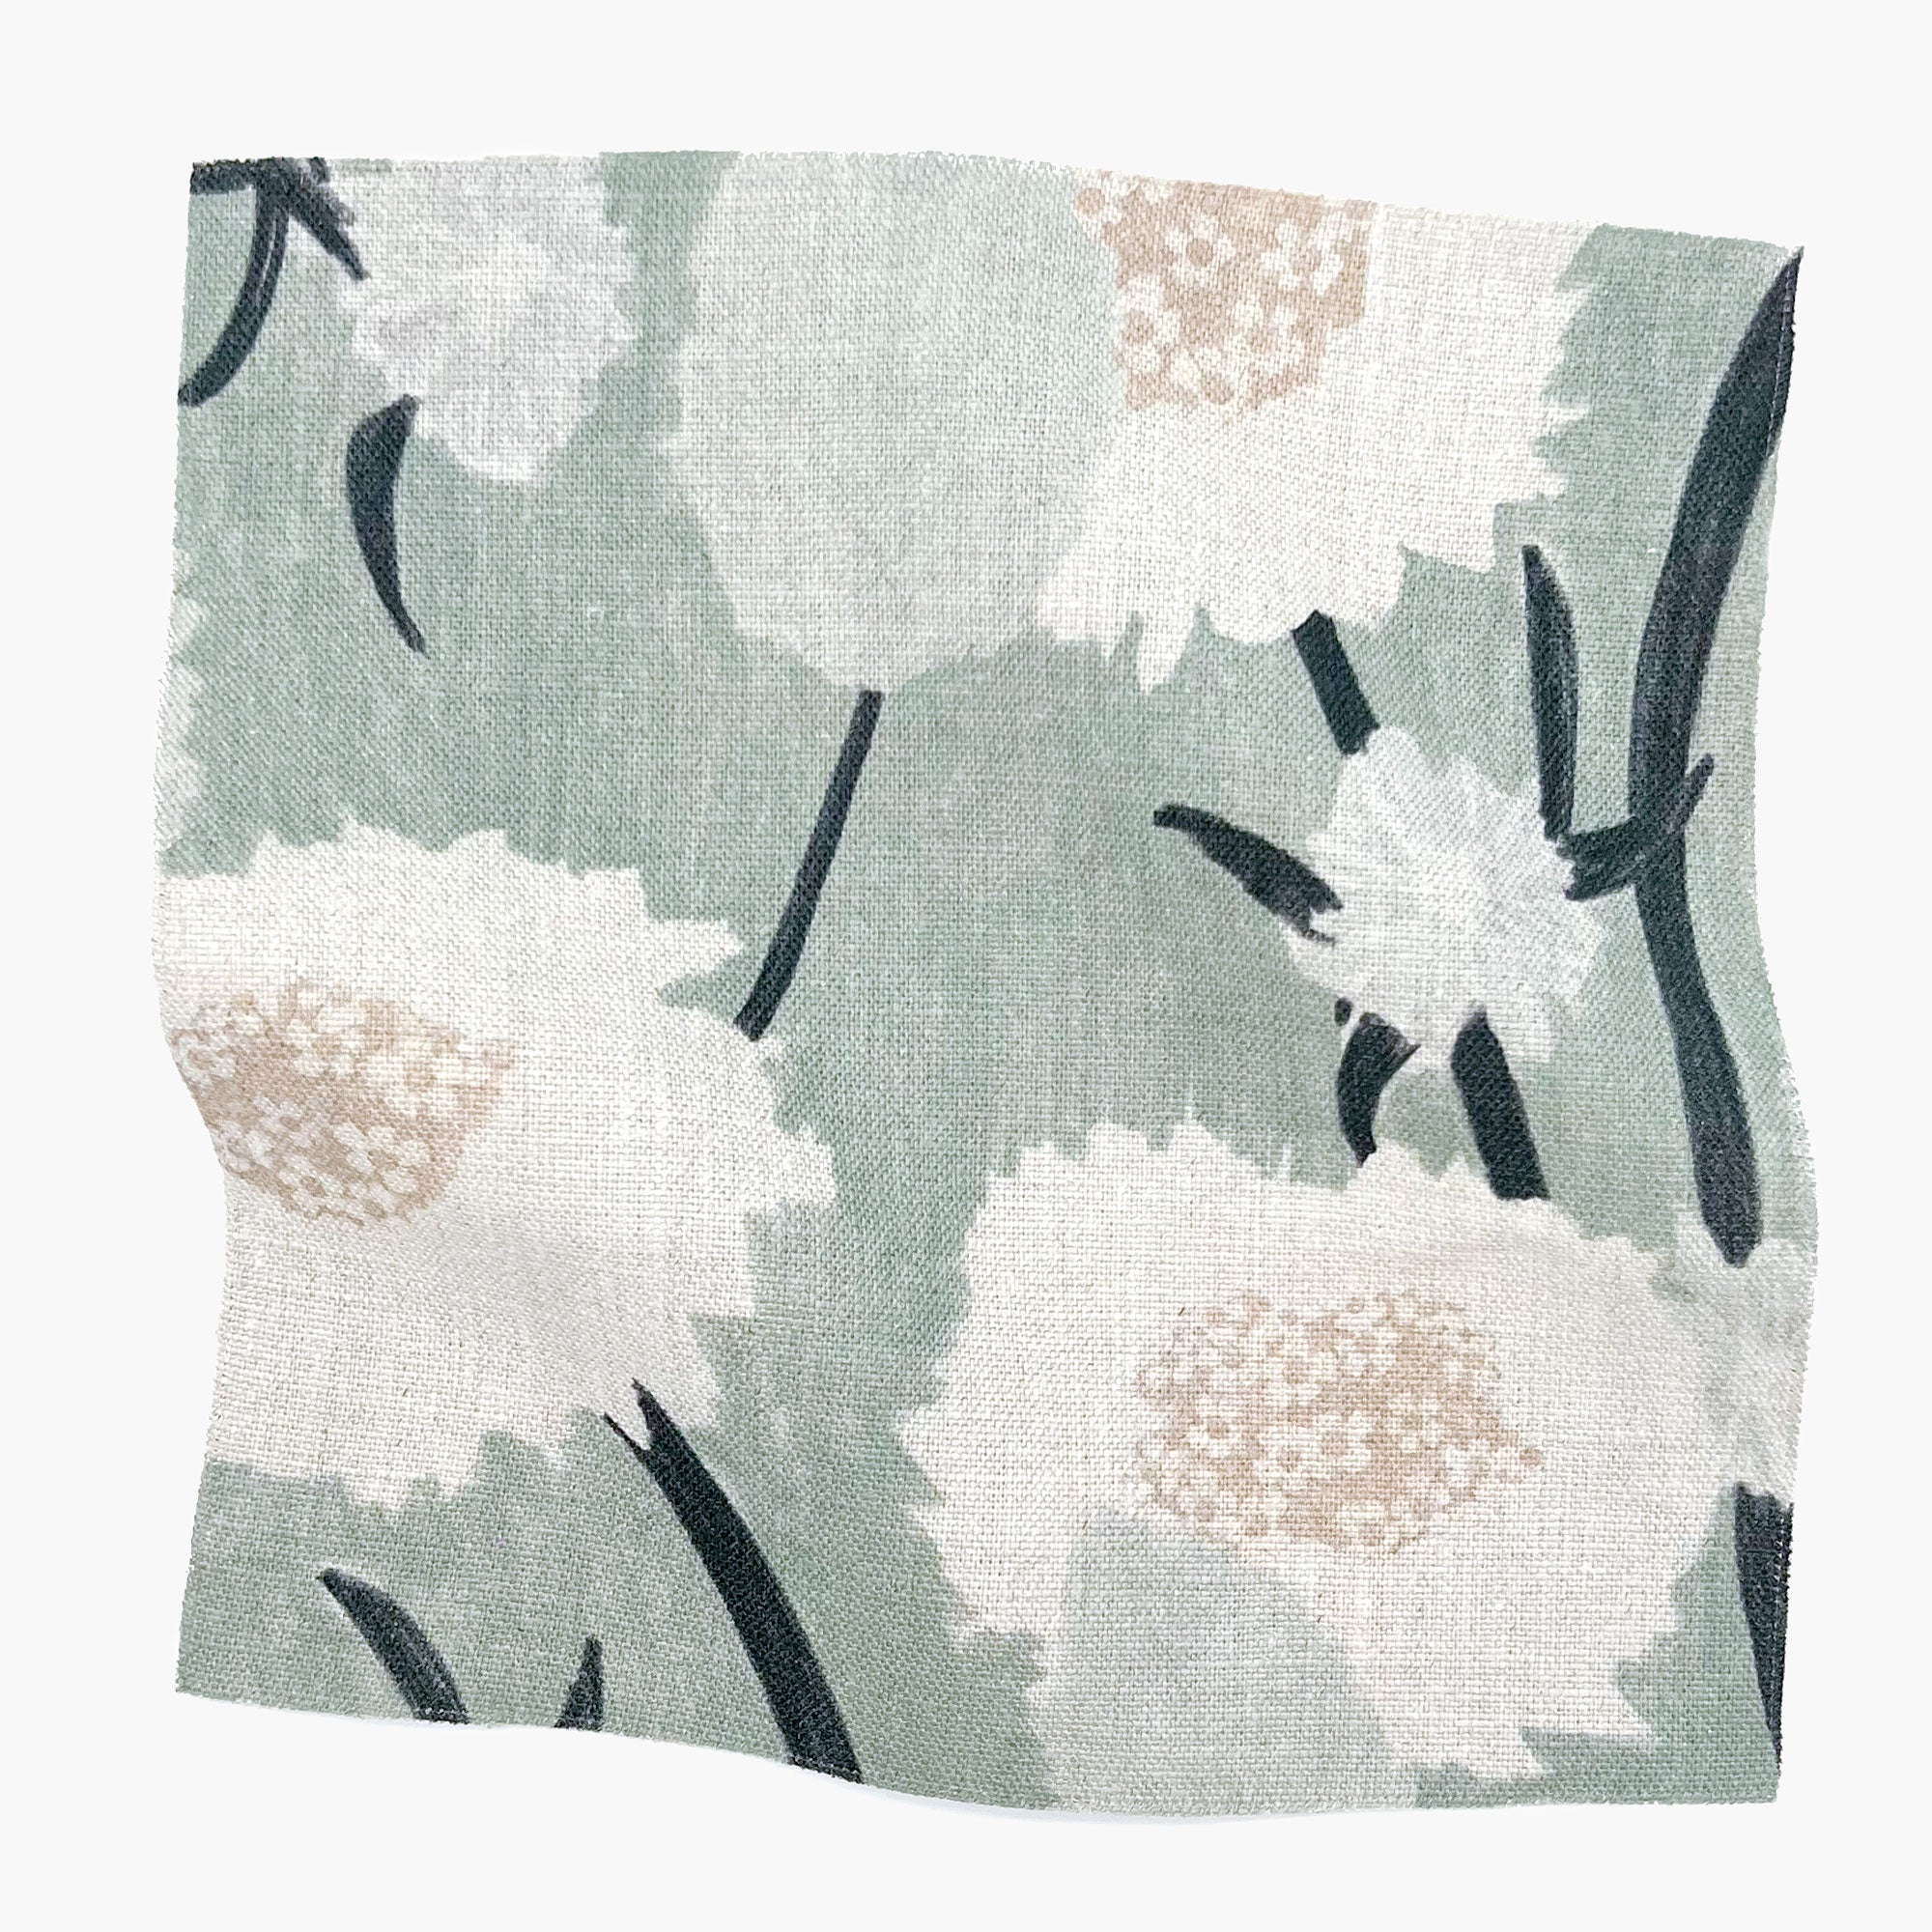 Square fabric swatch in a playful floral print in shades of white, pink and gray on a pale green field.